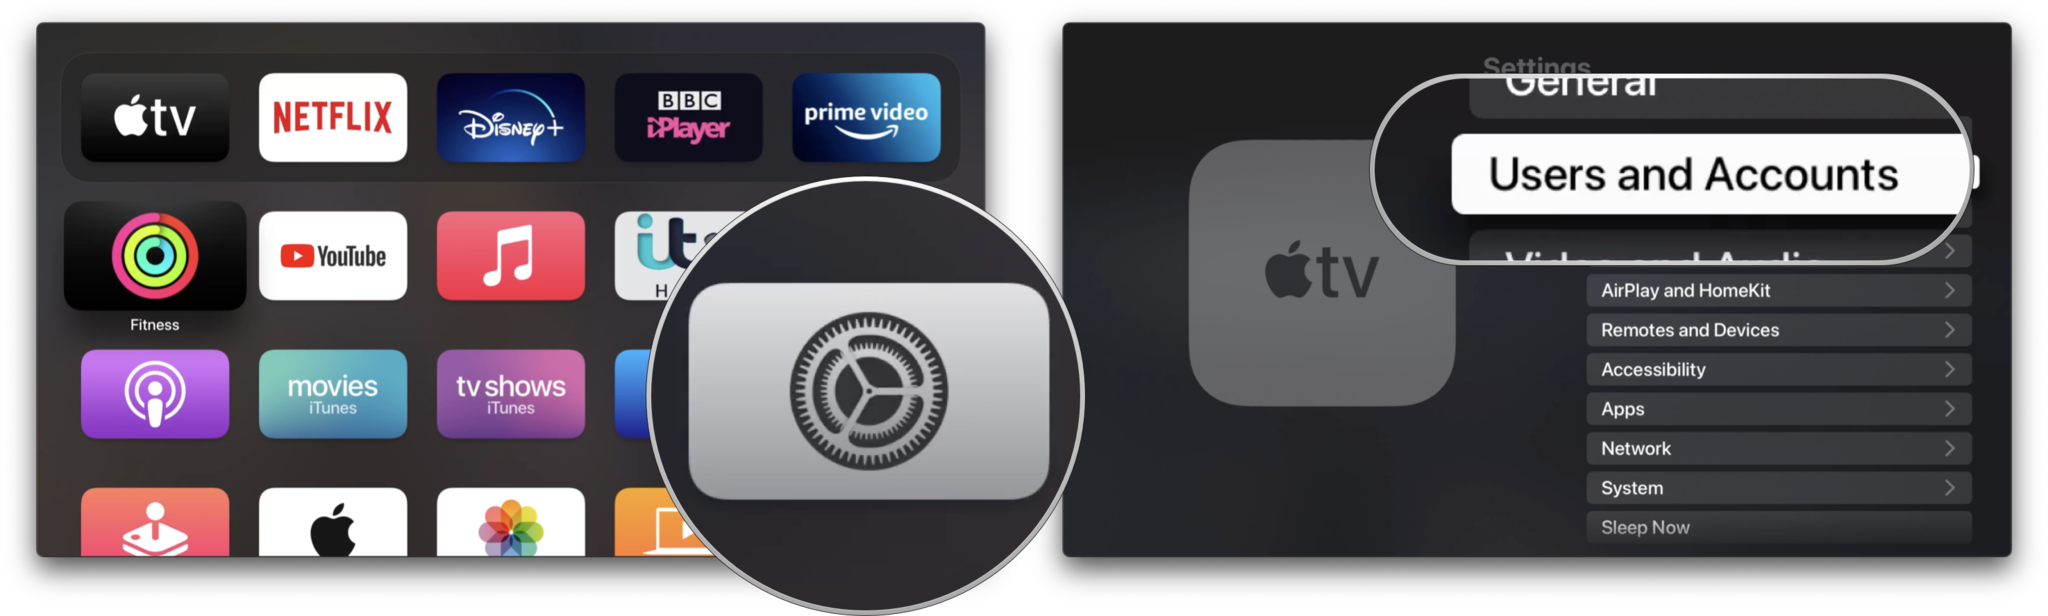 Enable One Home Screen on Apple TV: Open Settings, click Users and Accounts